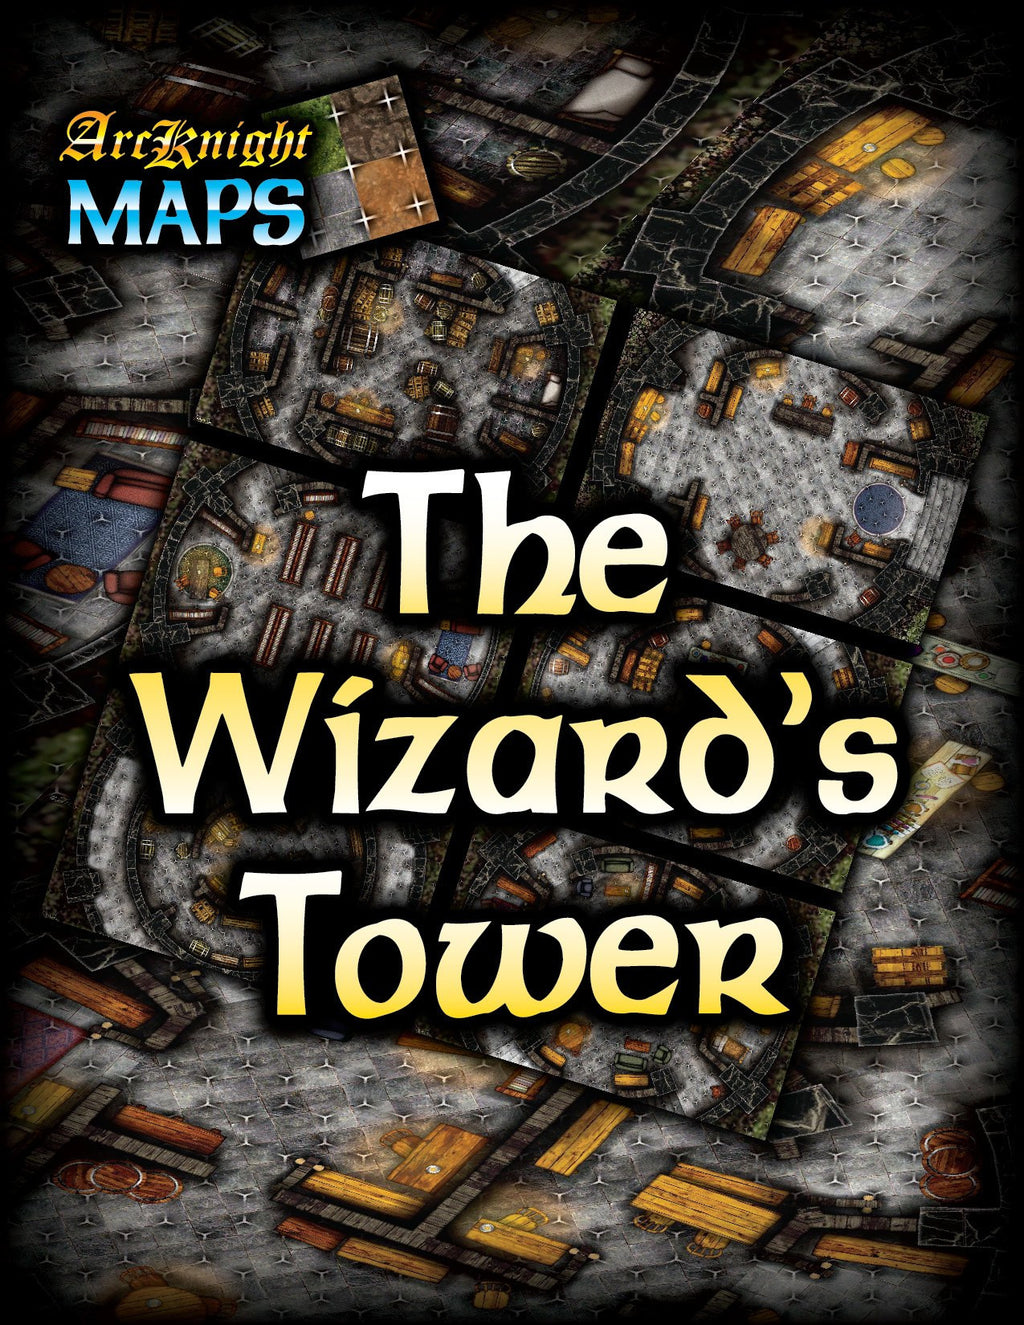 Arcknight Maps: The Wizard's Tower